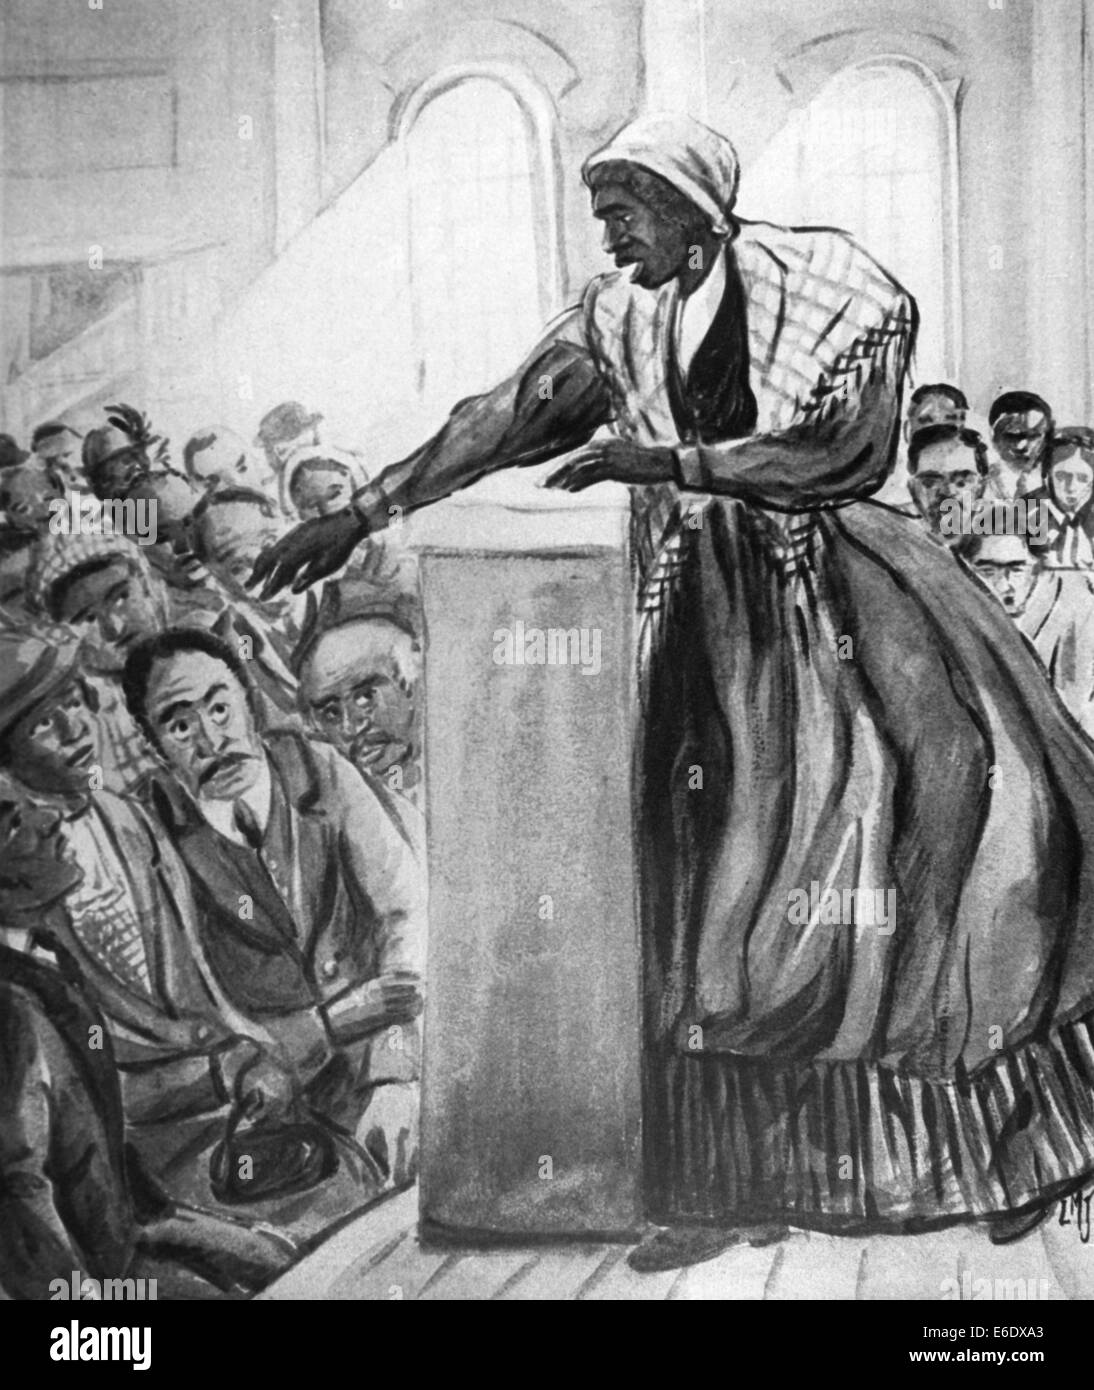 Sojourner Truth, African-American Abolitionist and Women's Rights Activist, Illustration from the Film, 'The Emerging Woman', Stock Photo